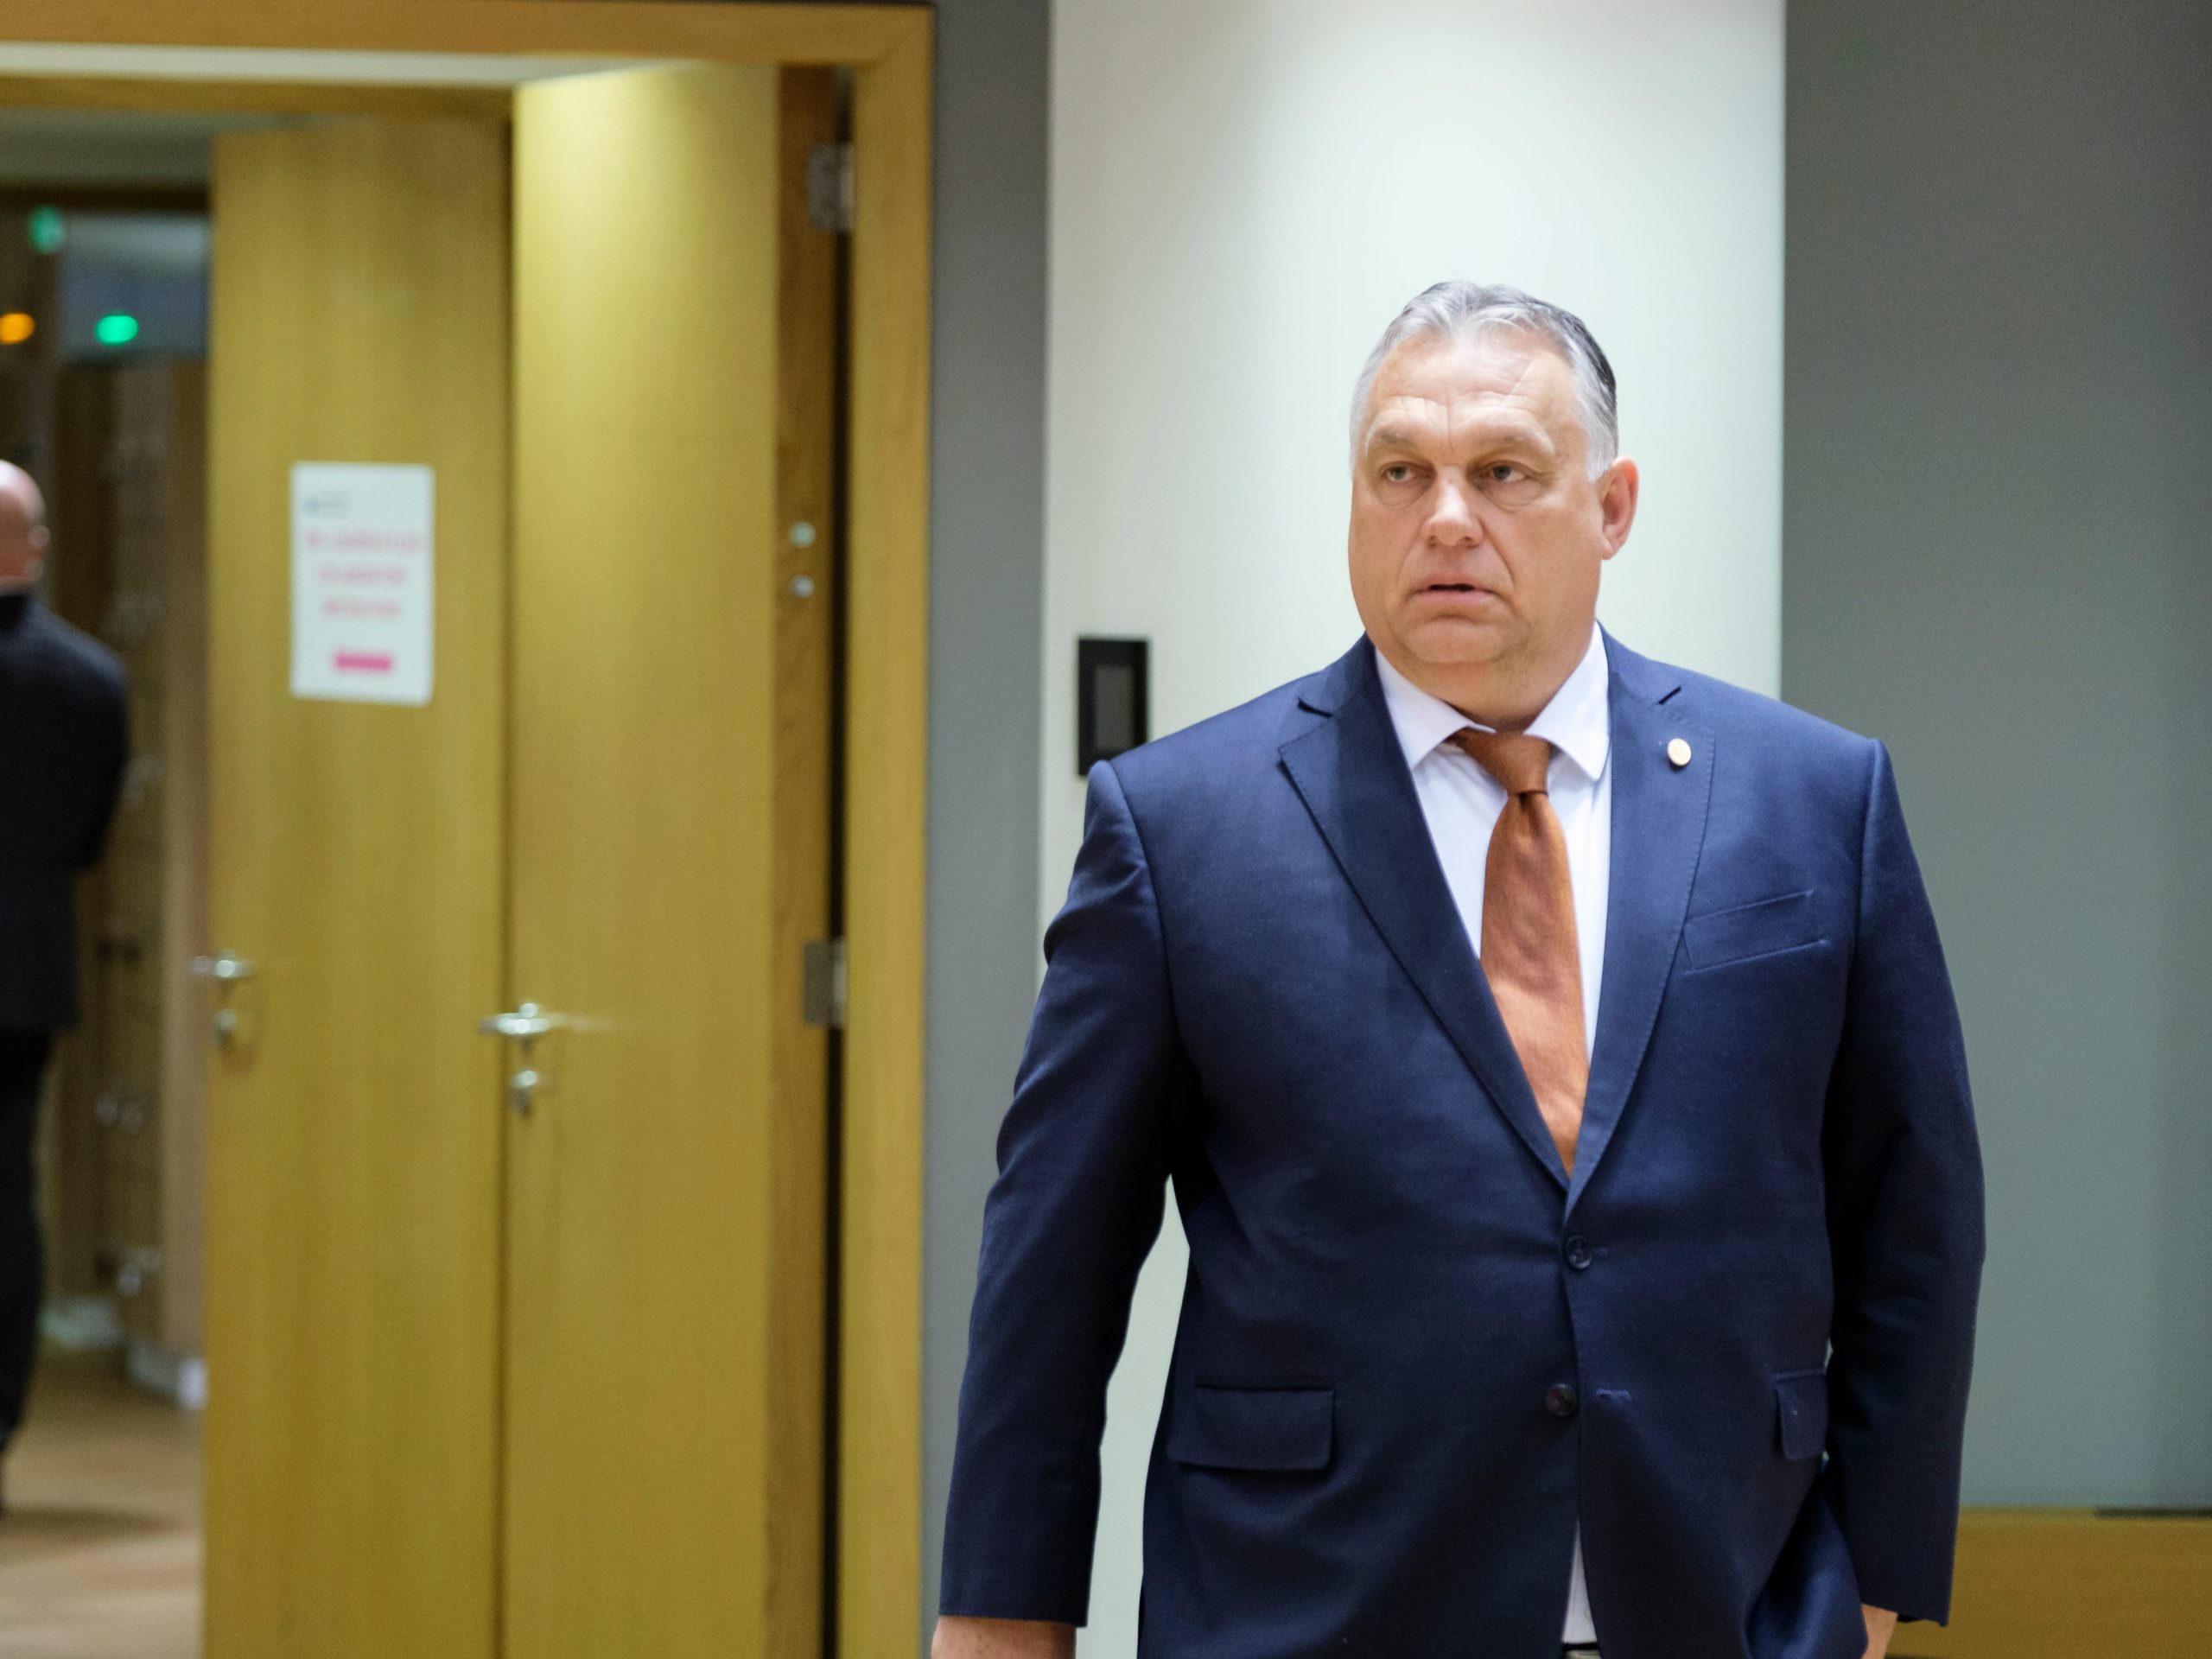 BRUSSELS, BELGIUM - JUNE 24: Hungarian Prime Minister Viktor Mihaly Orban arrives forf the second day of an EU summit in the Europa building, the EU Council headquarter on June 24, 2022 in Brussels, Belgium. (Photo by Thierry Monasse/Getty Images)